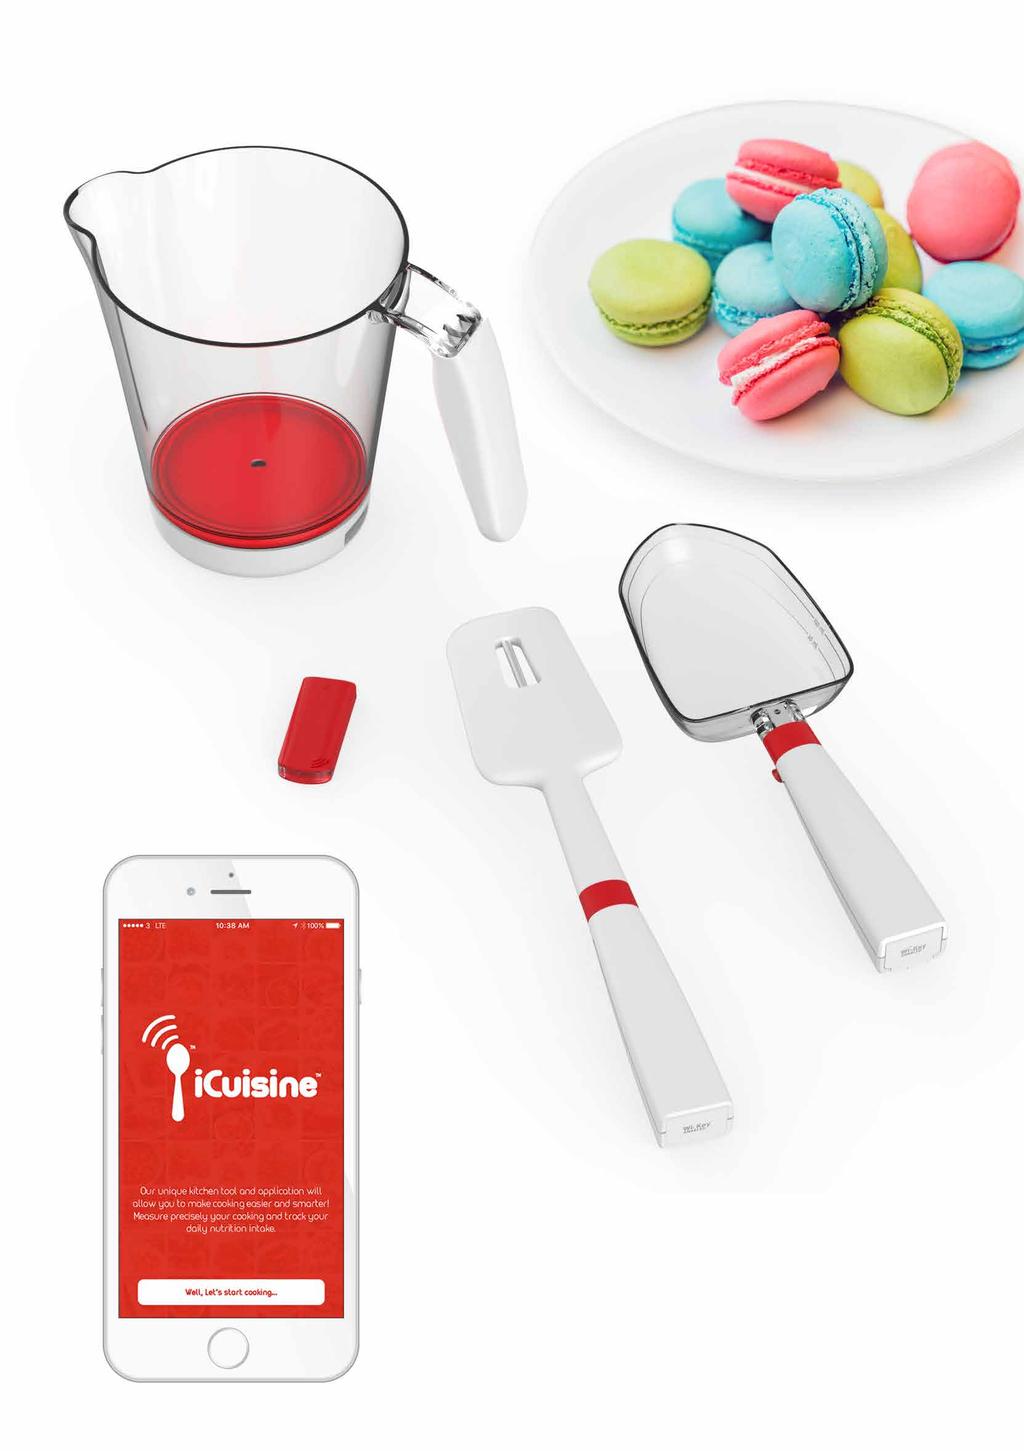 icuisine offers various Bluetooth enabled kitchen tools to work with an intuitive app for smartphones and tablets. It allows you to search, make and share delicious recipes with simple instructions.